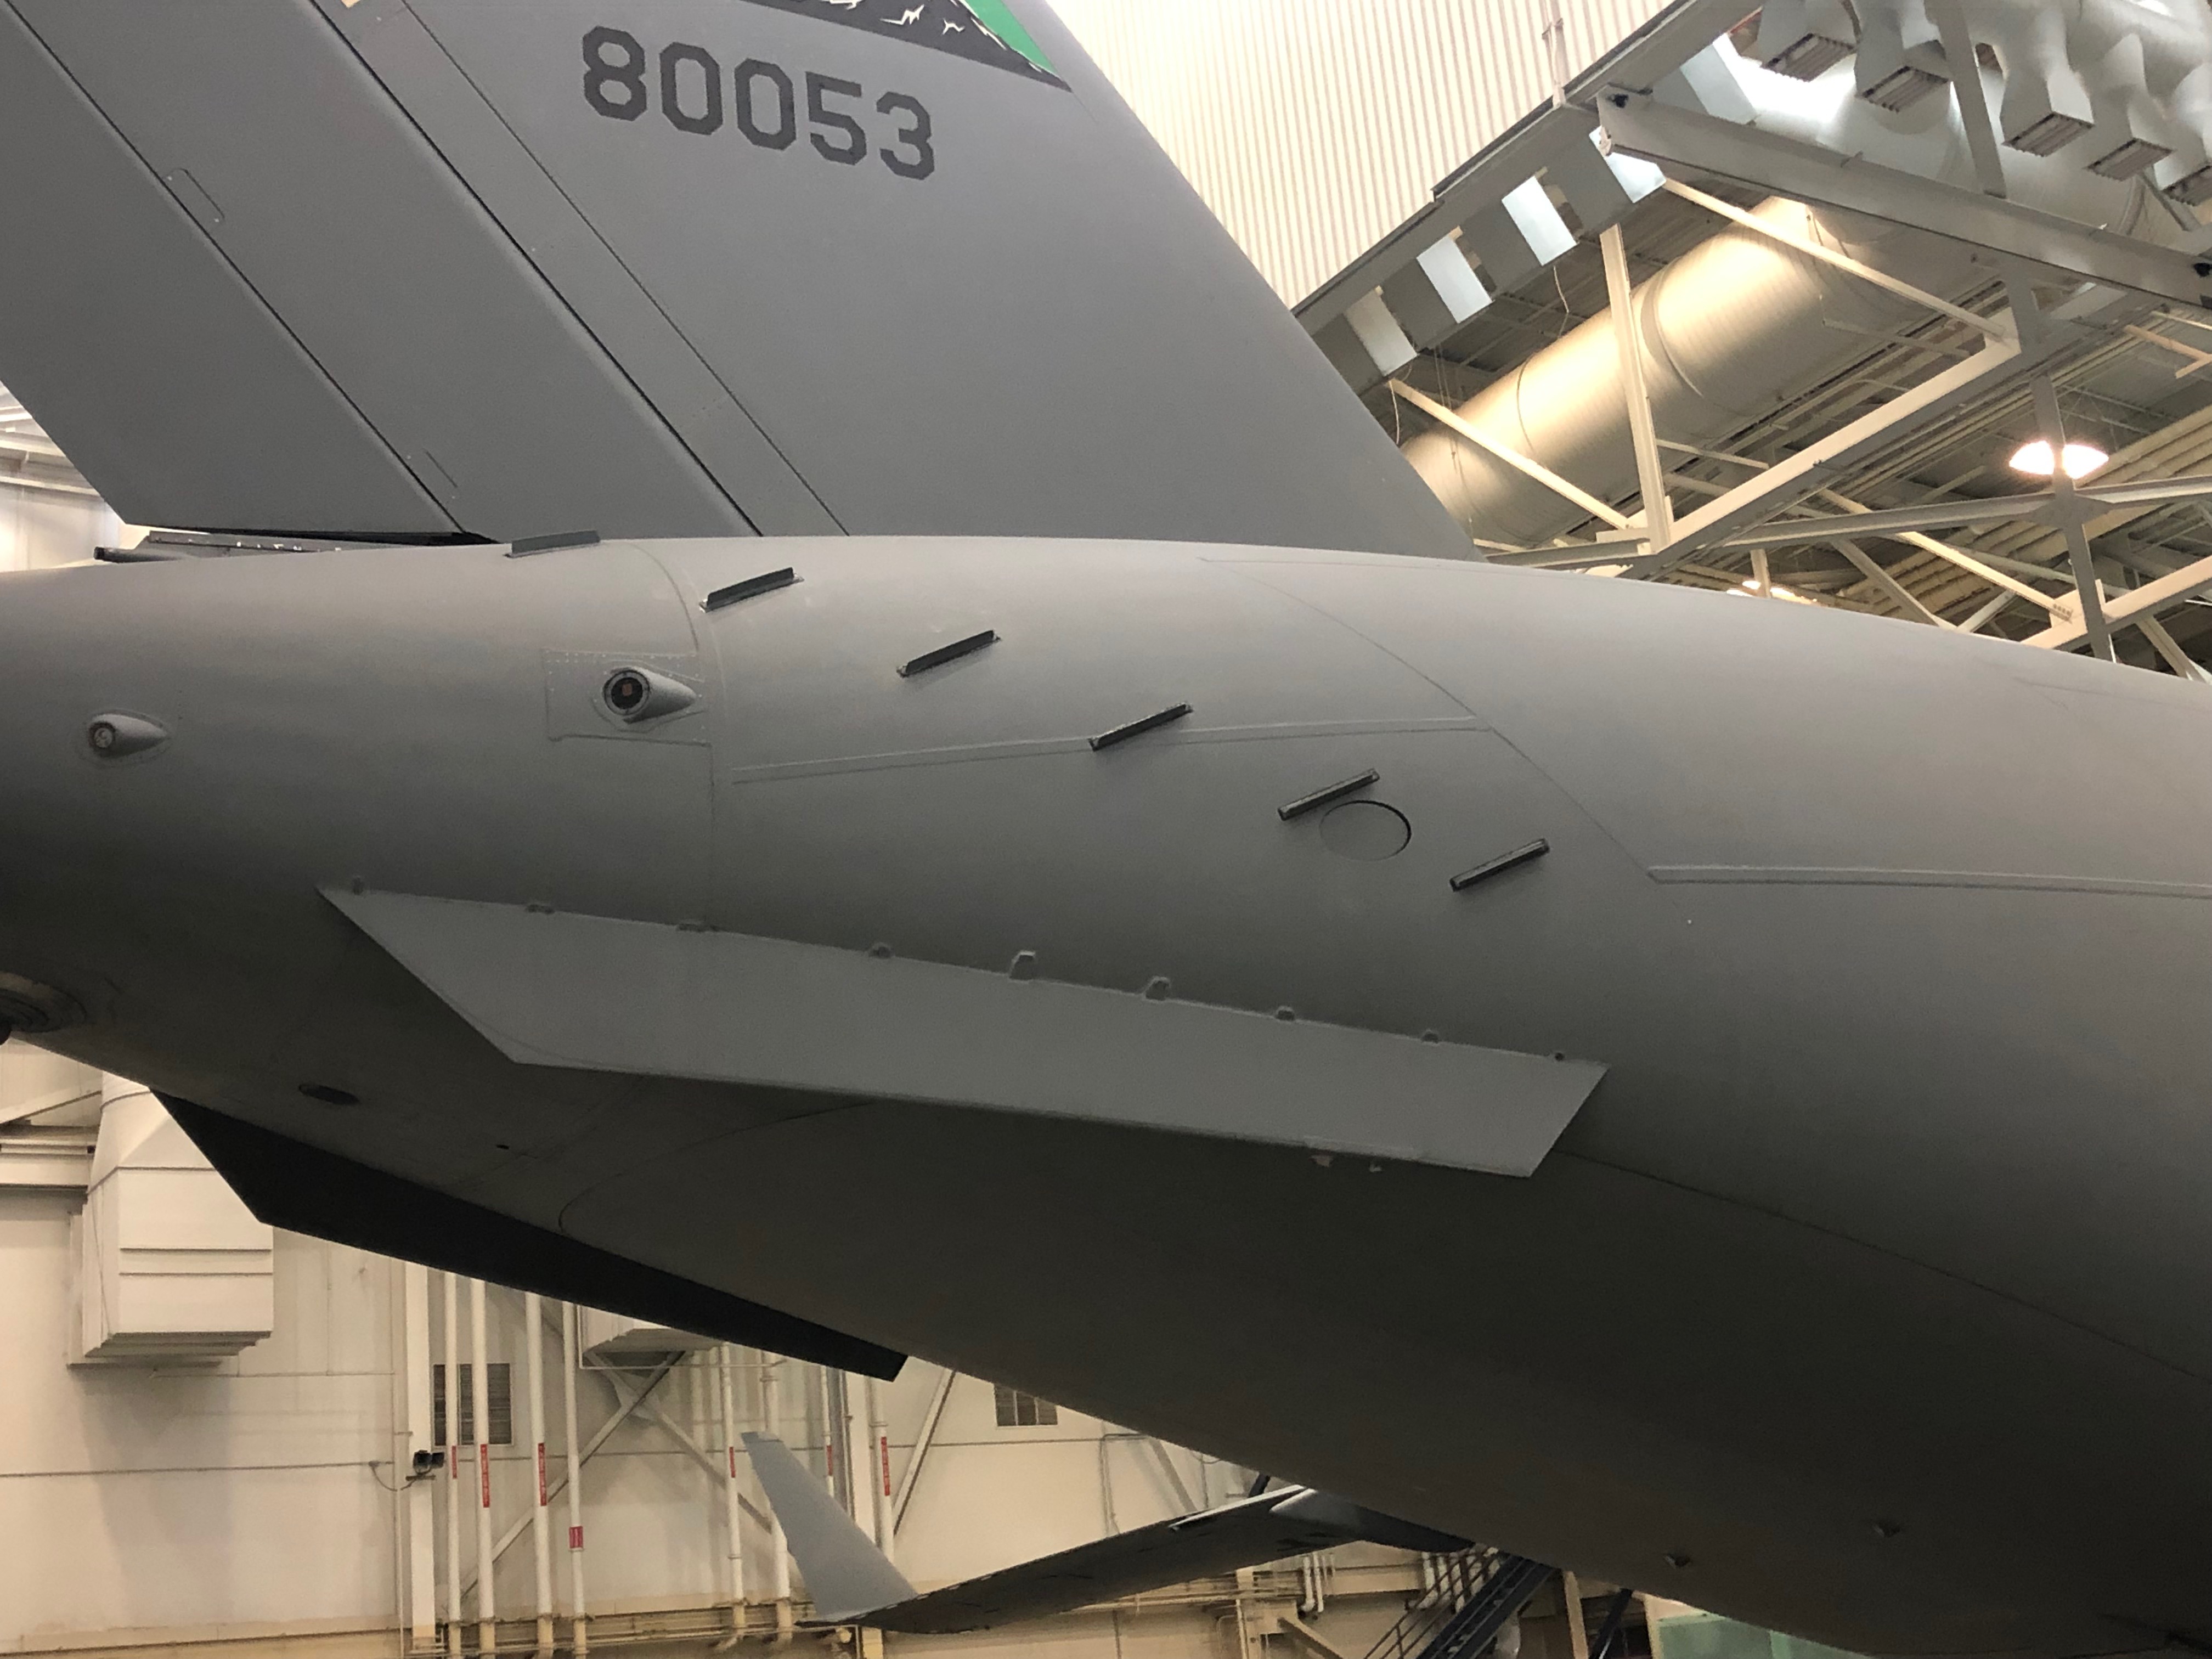 aerodynamic devices on the aft end of the aircraft